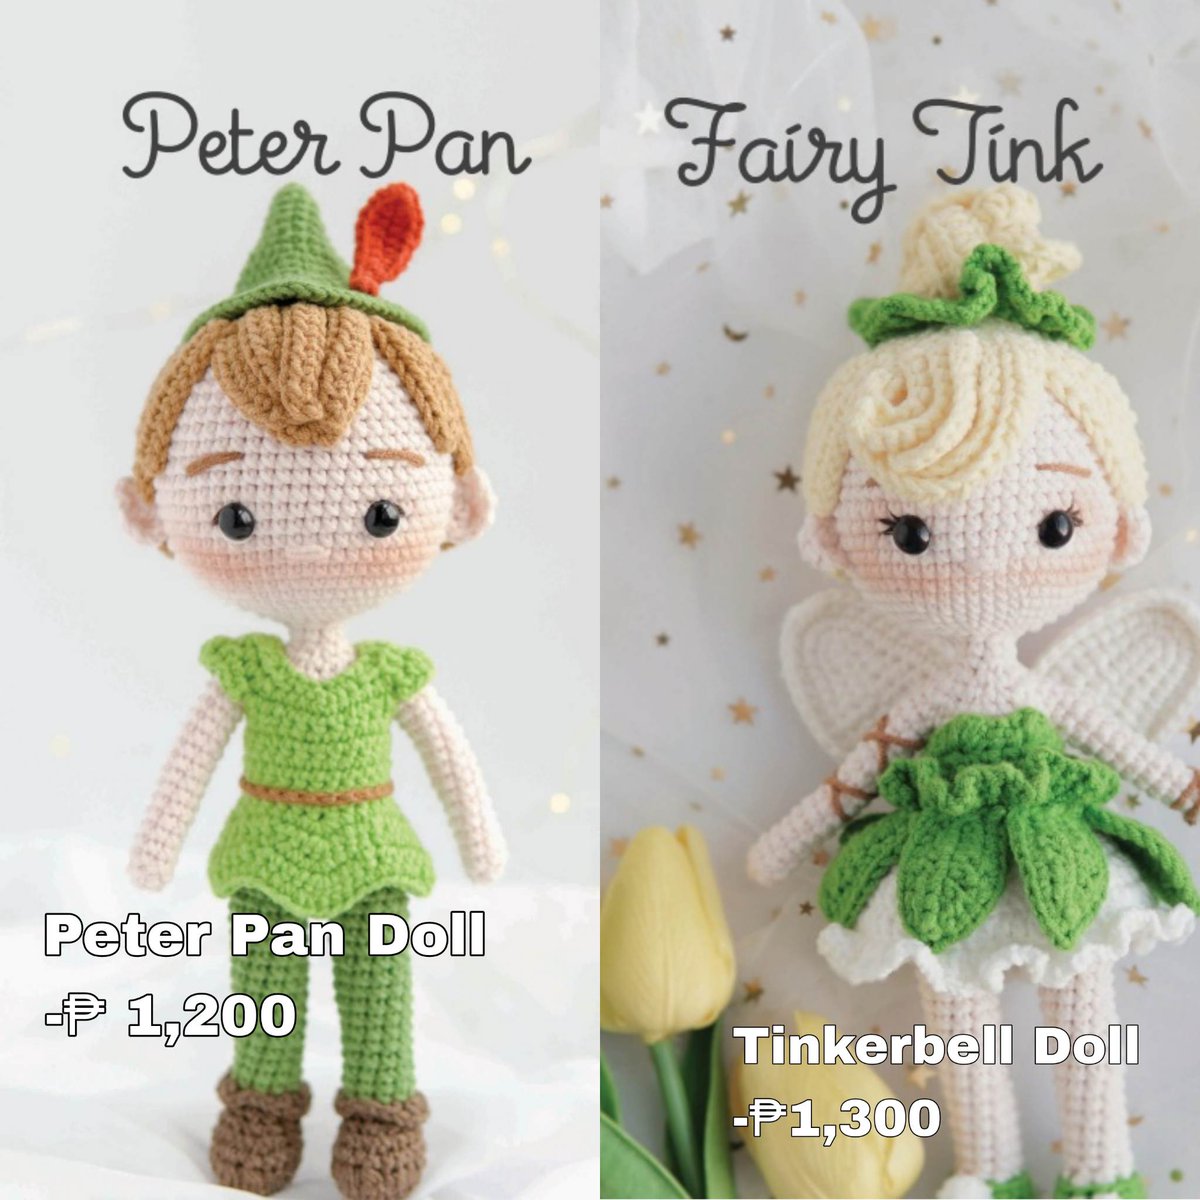 PETER PAN AND TINKERBELL CROCHET DOLL🧚‍♀️🧚🏻‍♂️

Why it is so pricey? Because this doll is handmade and 1-2 weeks to made. Pre-order your Crochet doll now!! Dm if interested🫶🏻

#DonBelle